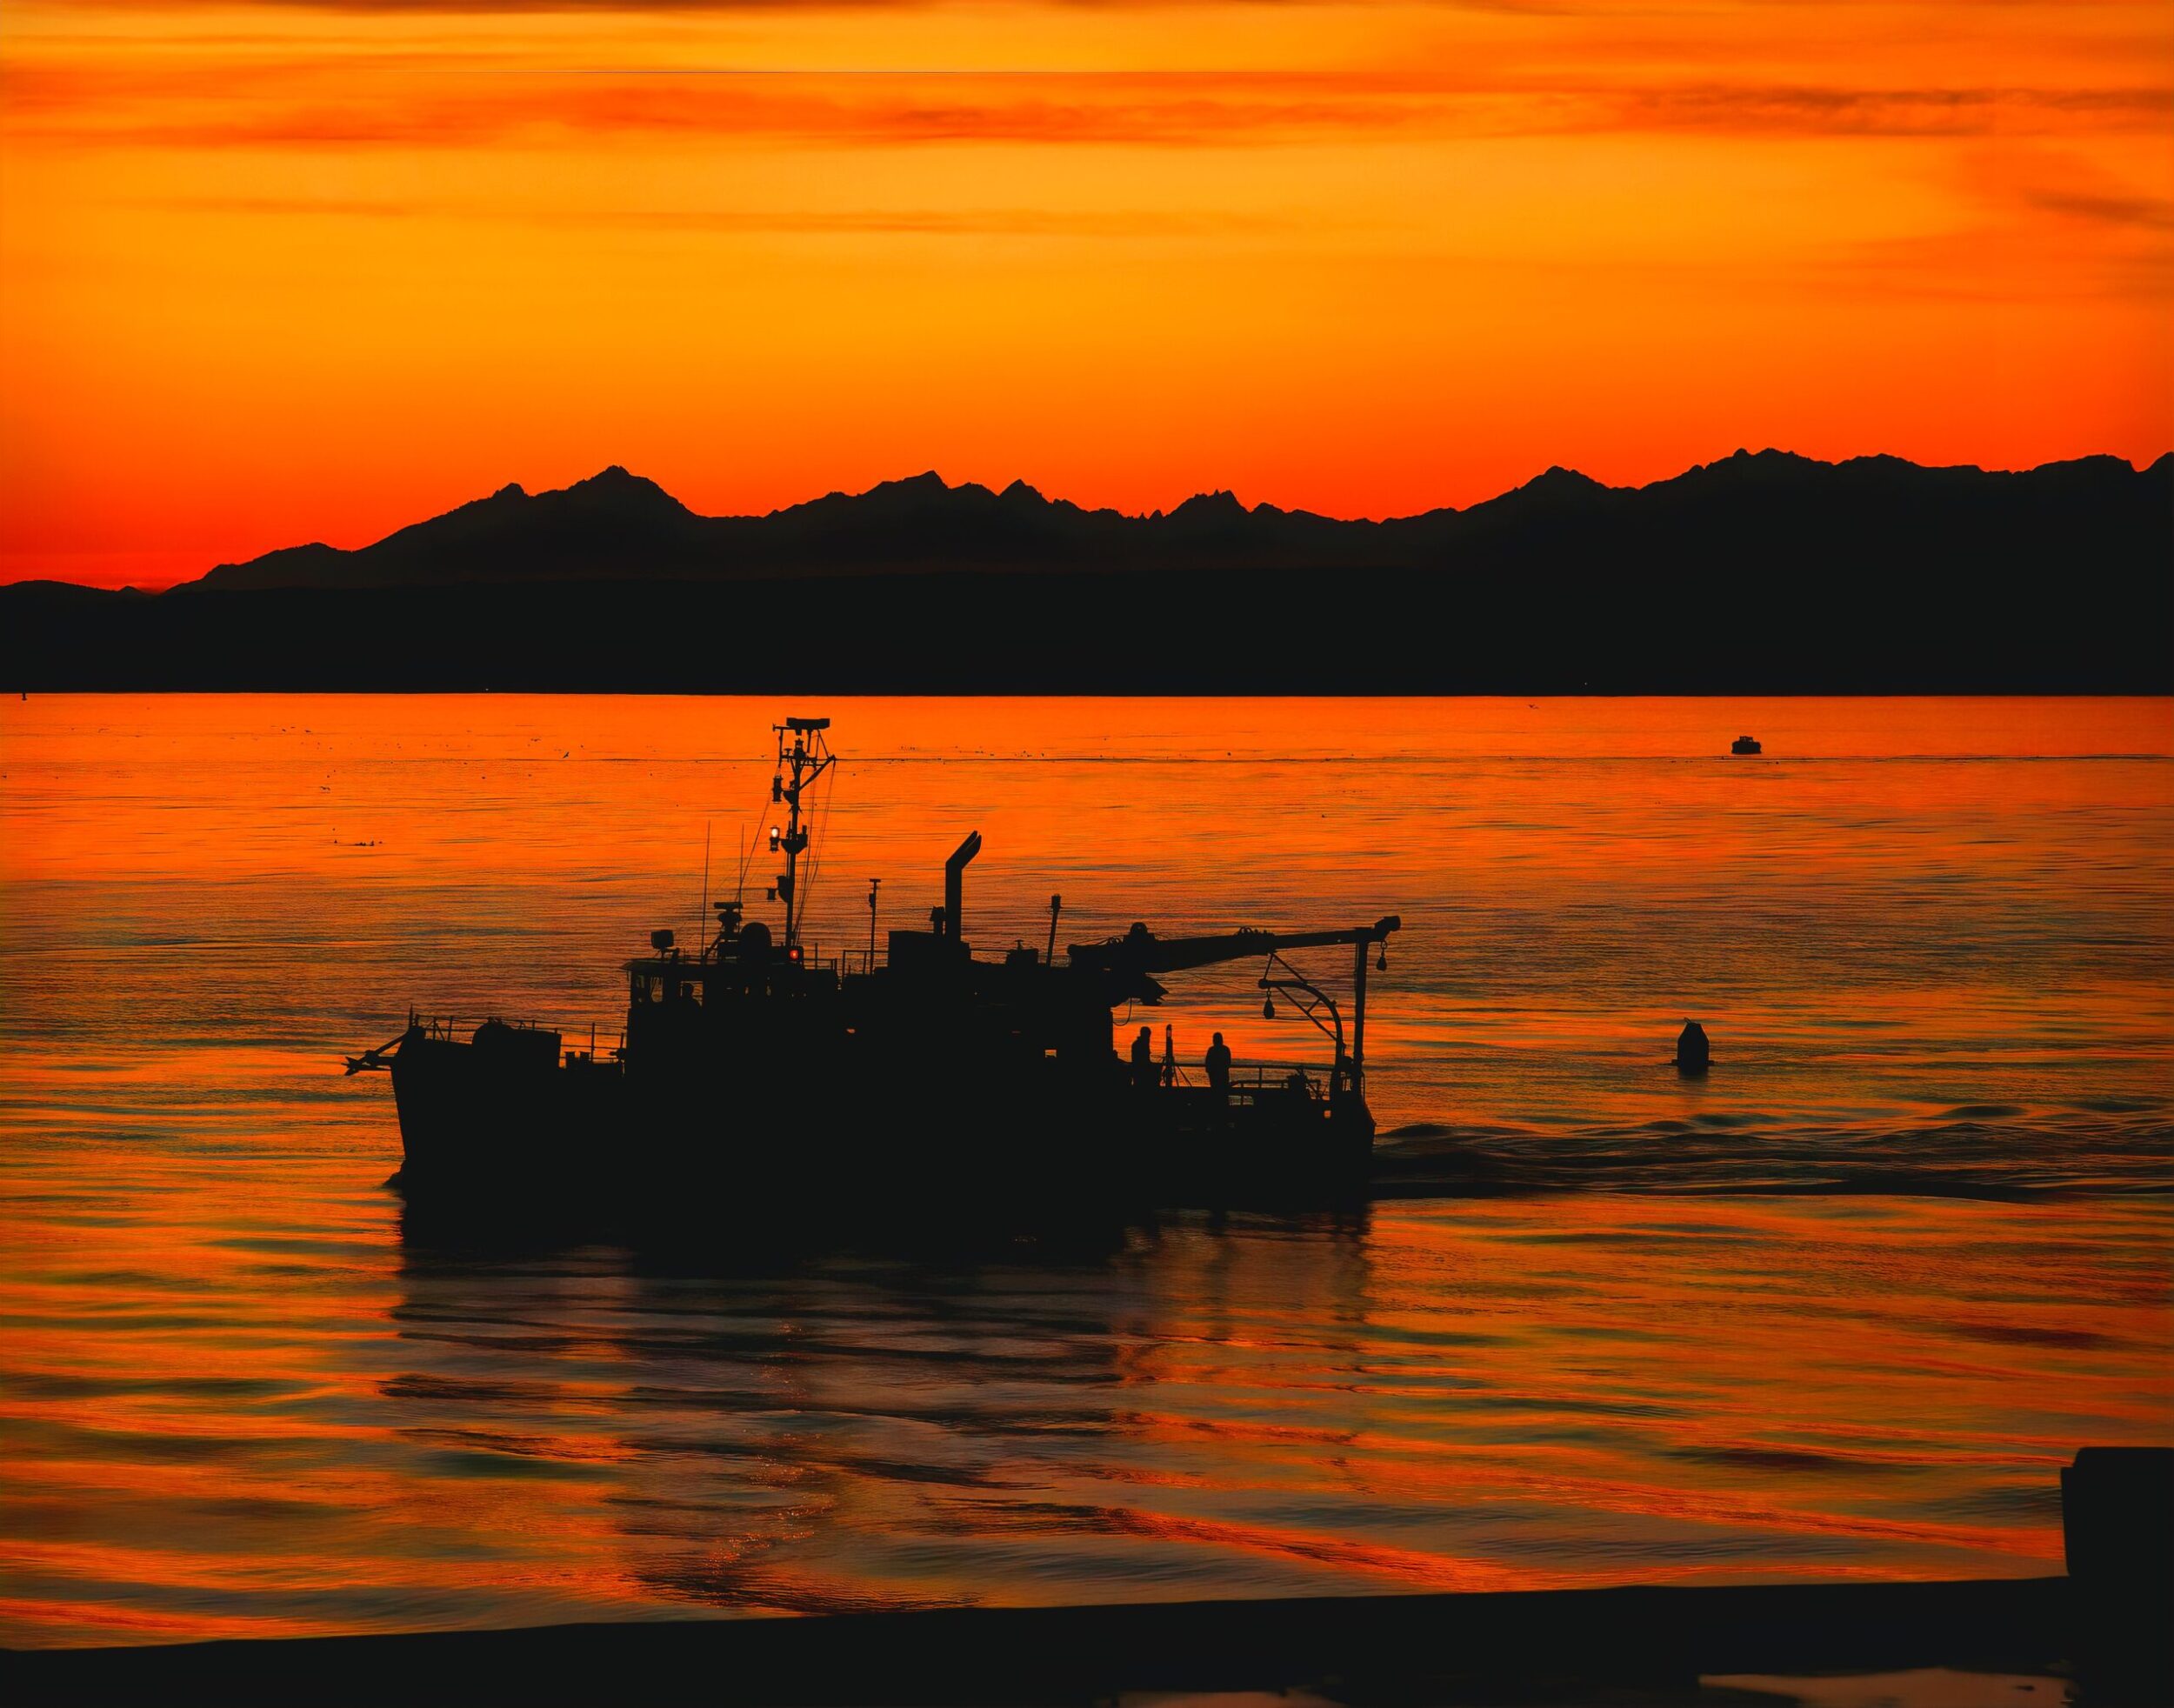 Don’t get caught! Puget Sound fishing boat at sunset photo by Jack Prichett on Unsplash